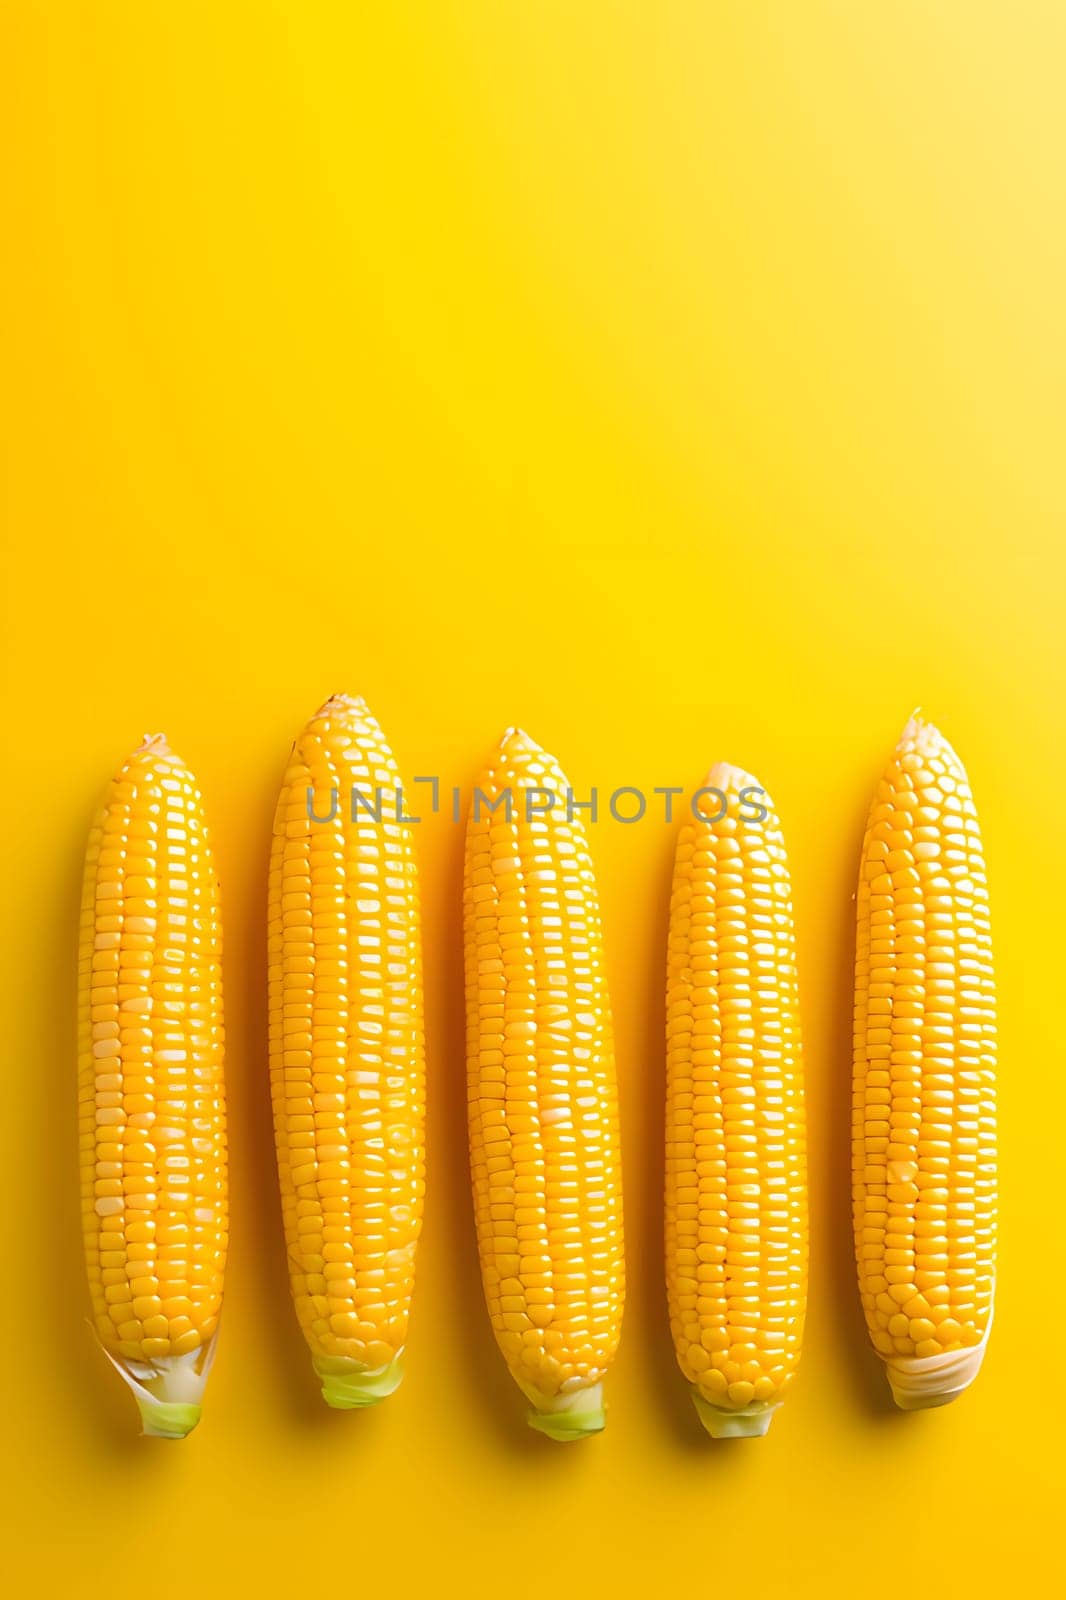 Lying at the bottom yellow corn cobs on a bright yellow orange background., banner with space for your own content. Blurred background. by ThemesS